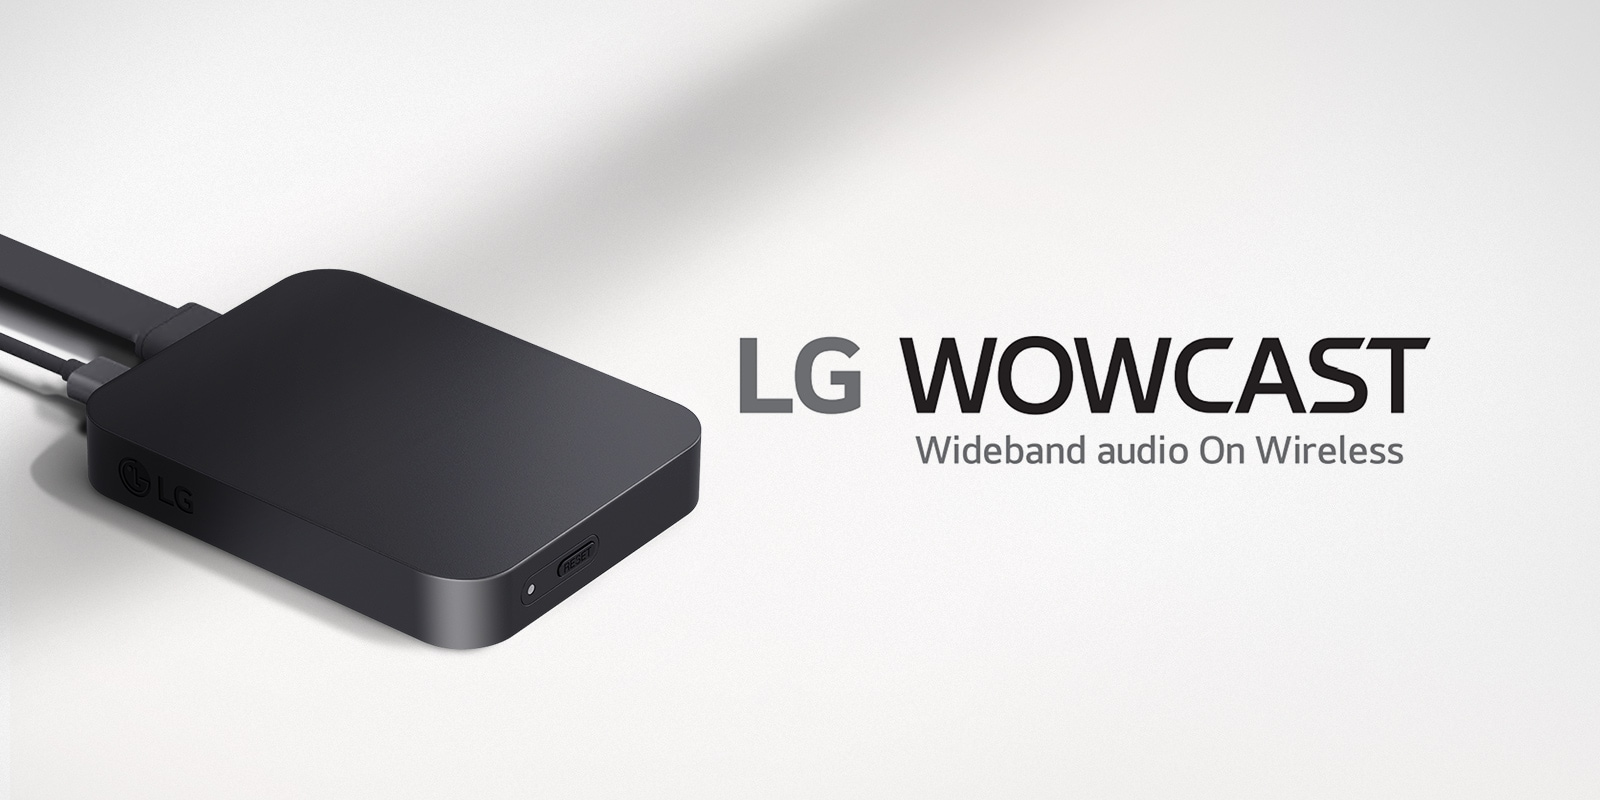 LG WOWCAST logo is placed on the right and a right-sided diagonal view of WOWCAST product on left